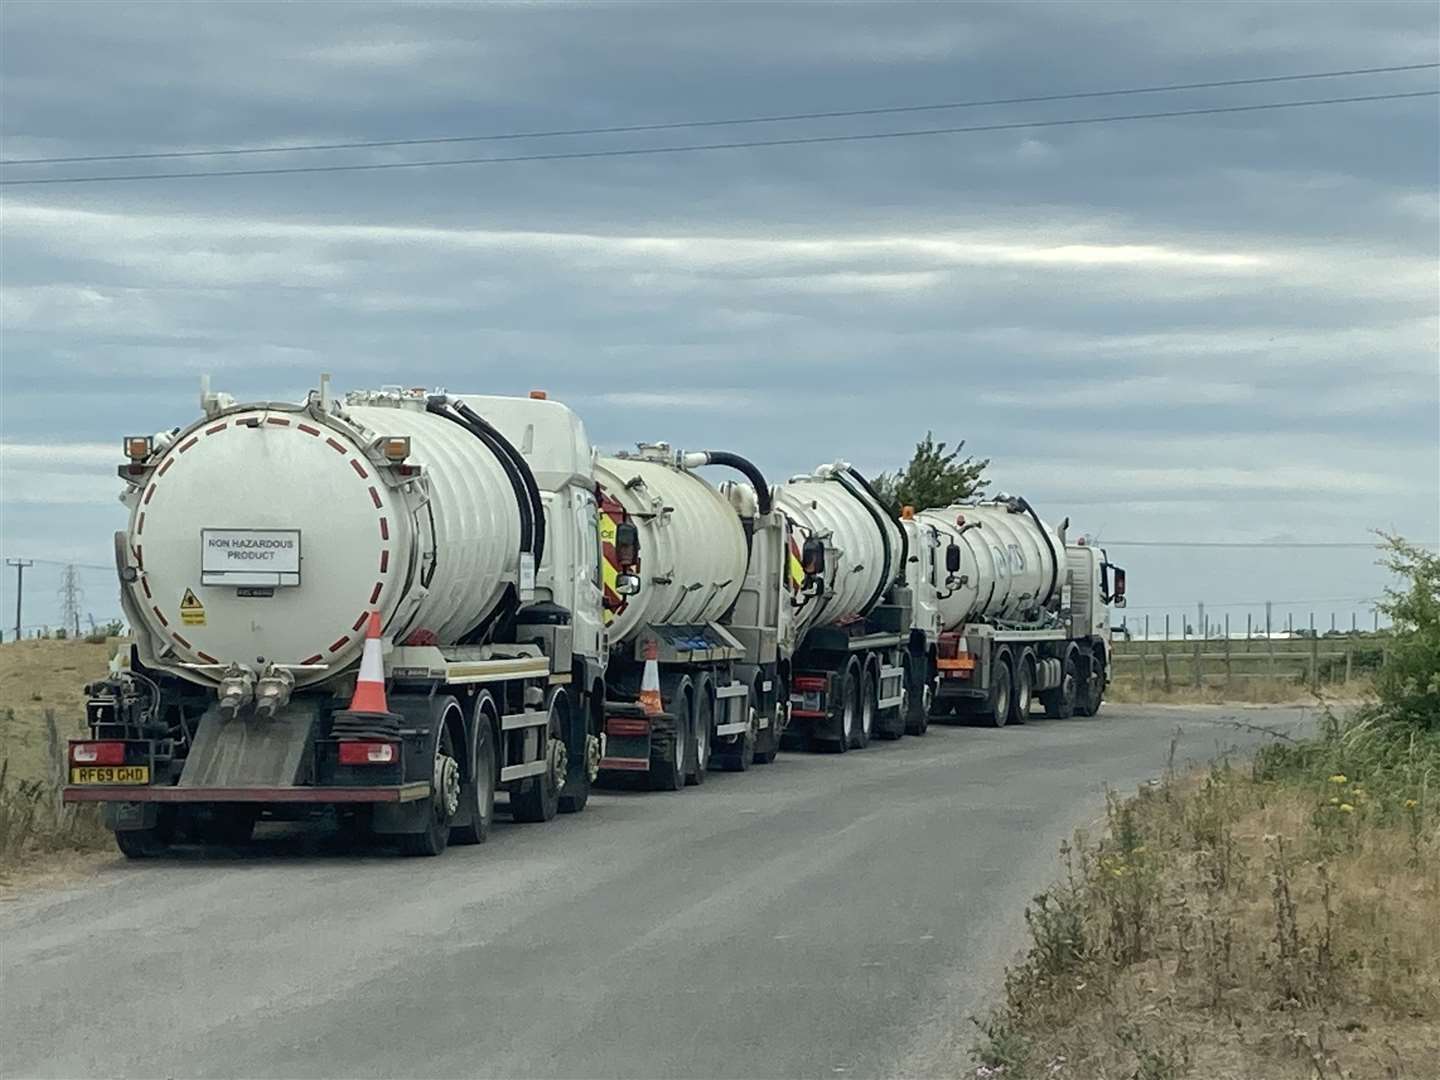 A fleet of tankers shipped in water to Sheppey when the main pipe burst in two places cutting off supplies to the Island